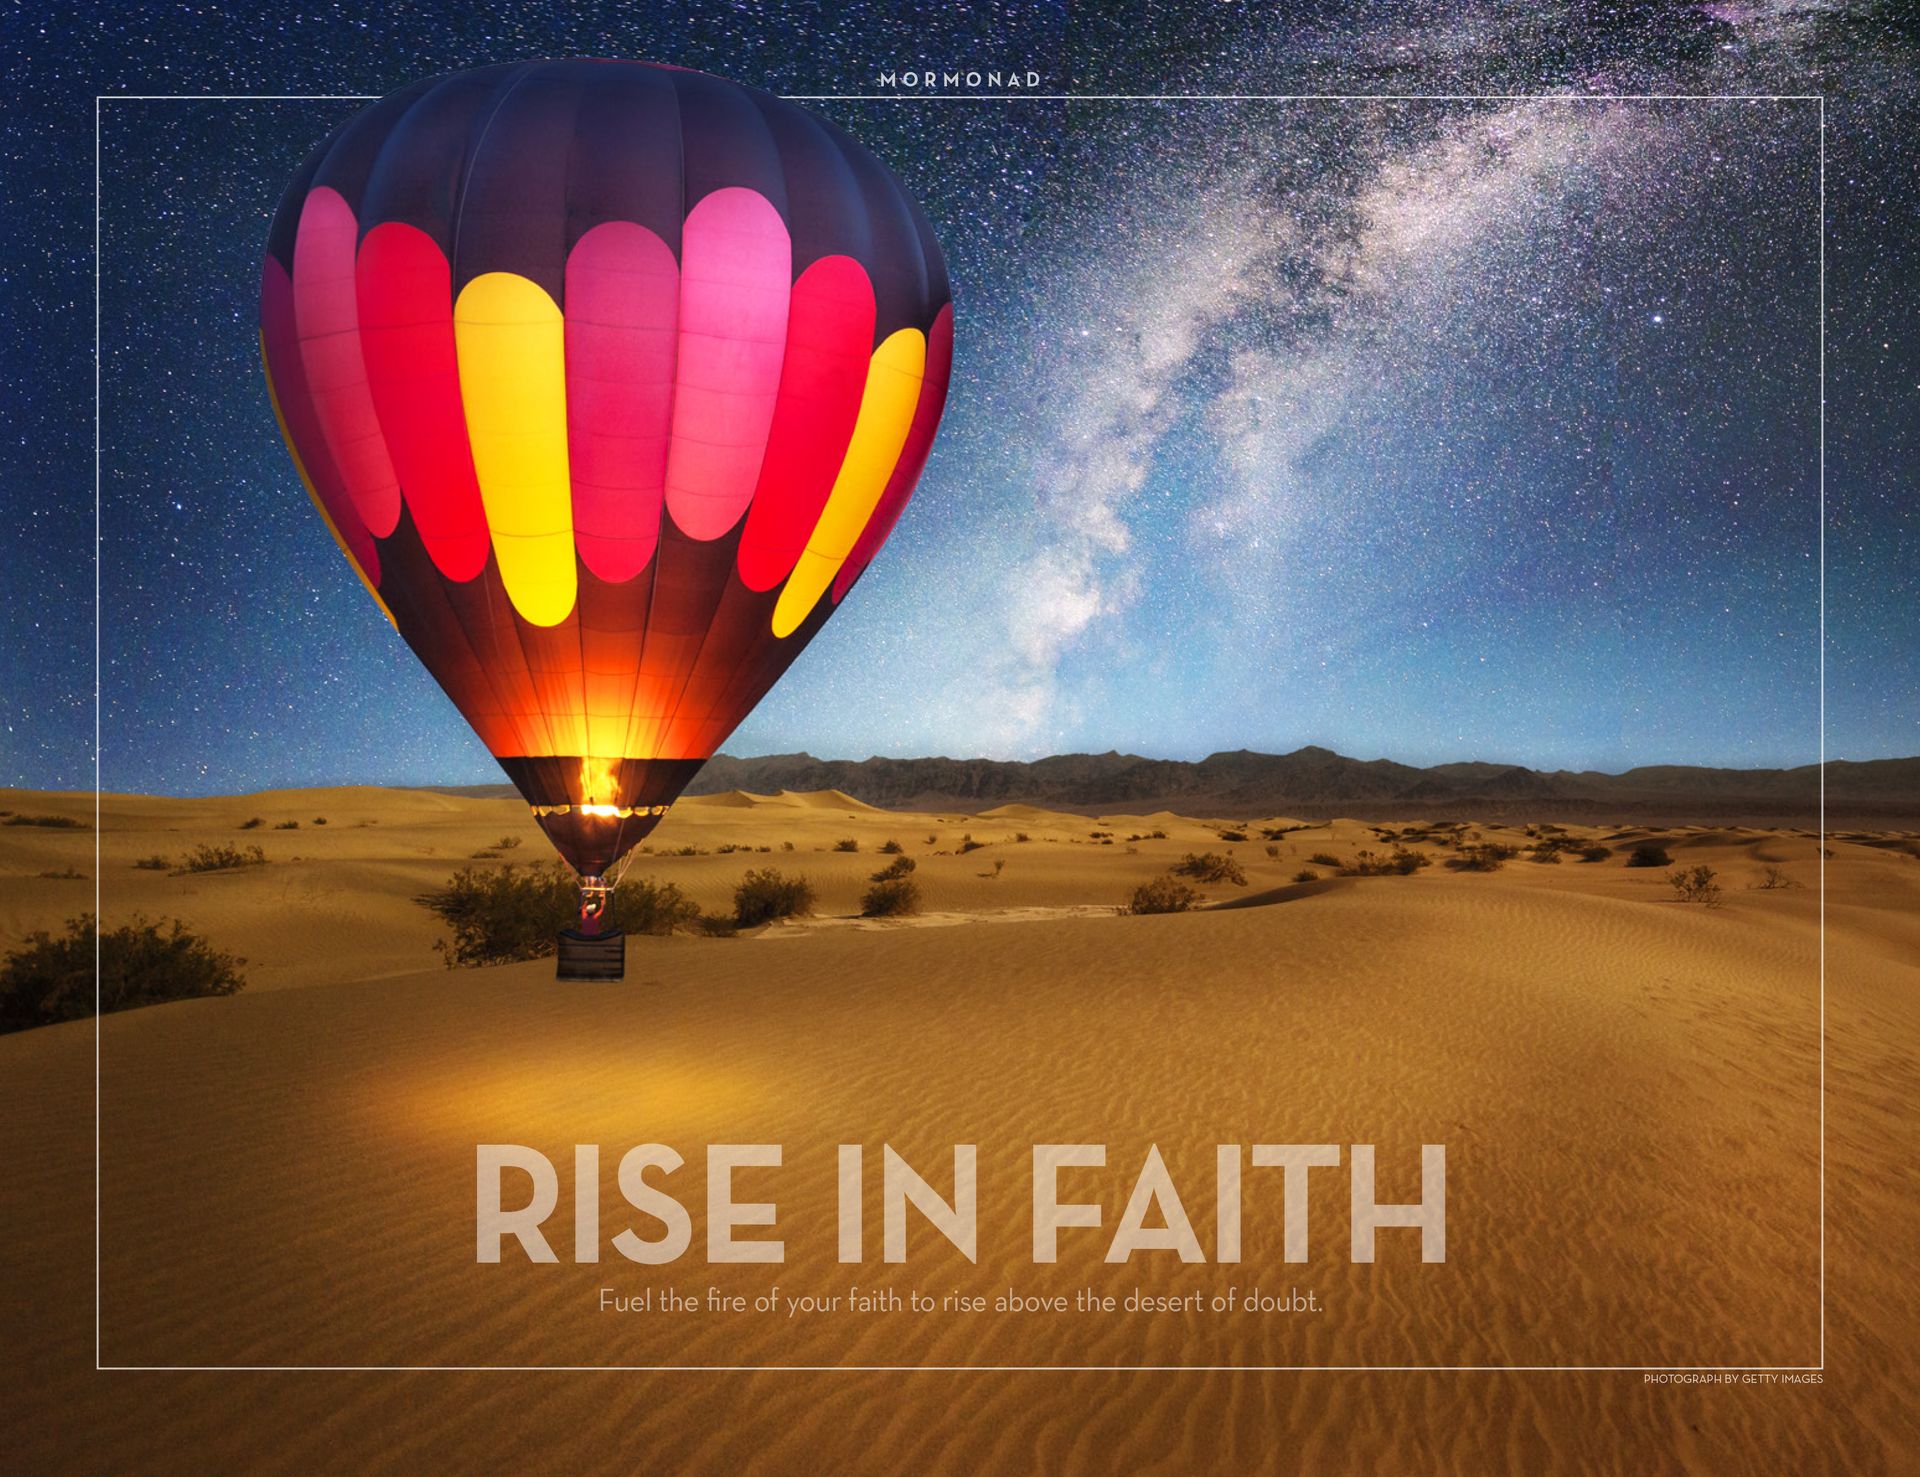 Fuel the fire of your faith to rise above the desert of doubt. © undefined ipCode 1.